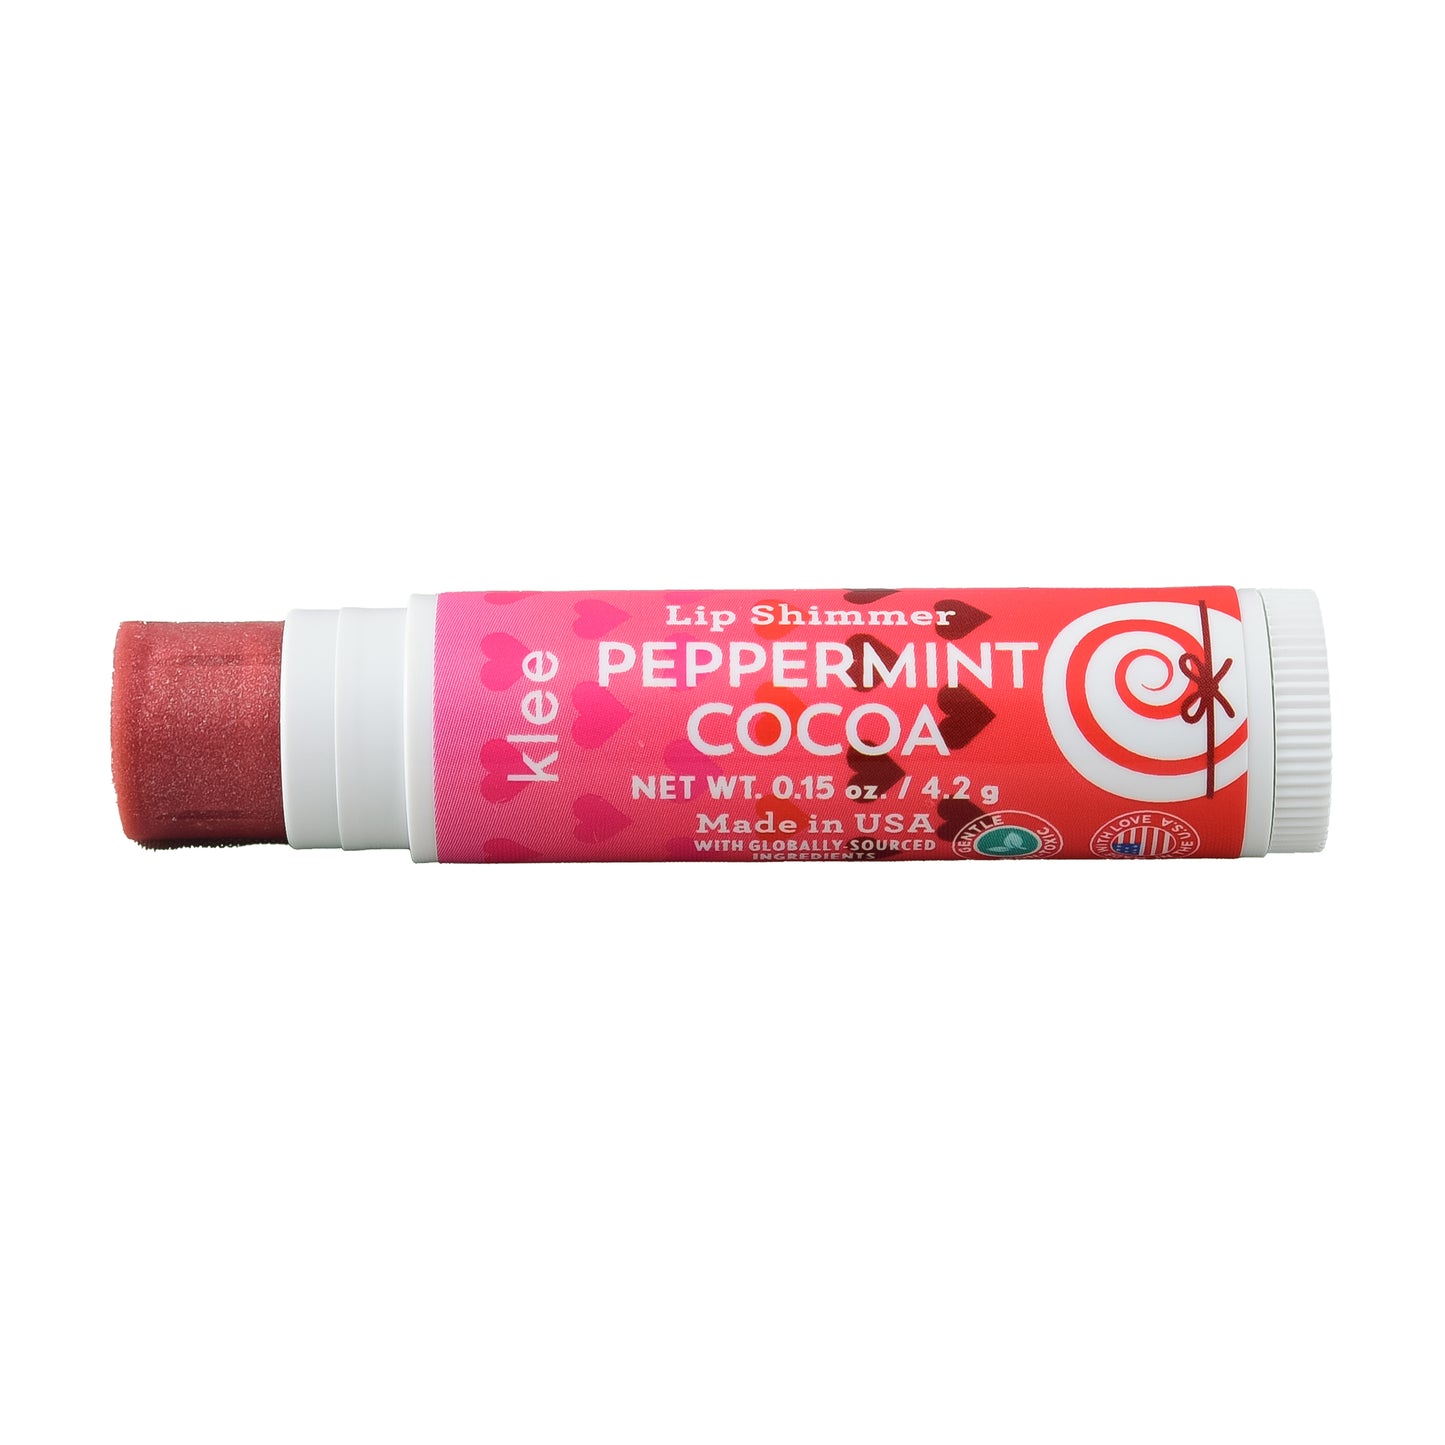 Klee Naturals Peppermint Cocoa Natural Lip Shimmer